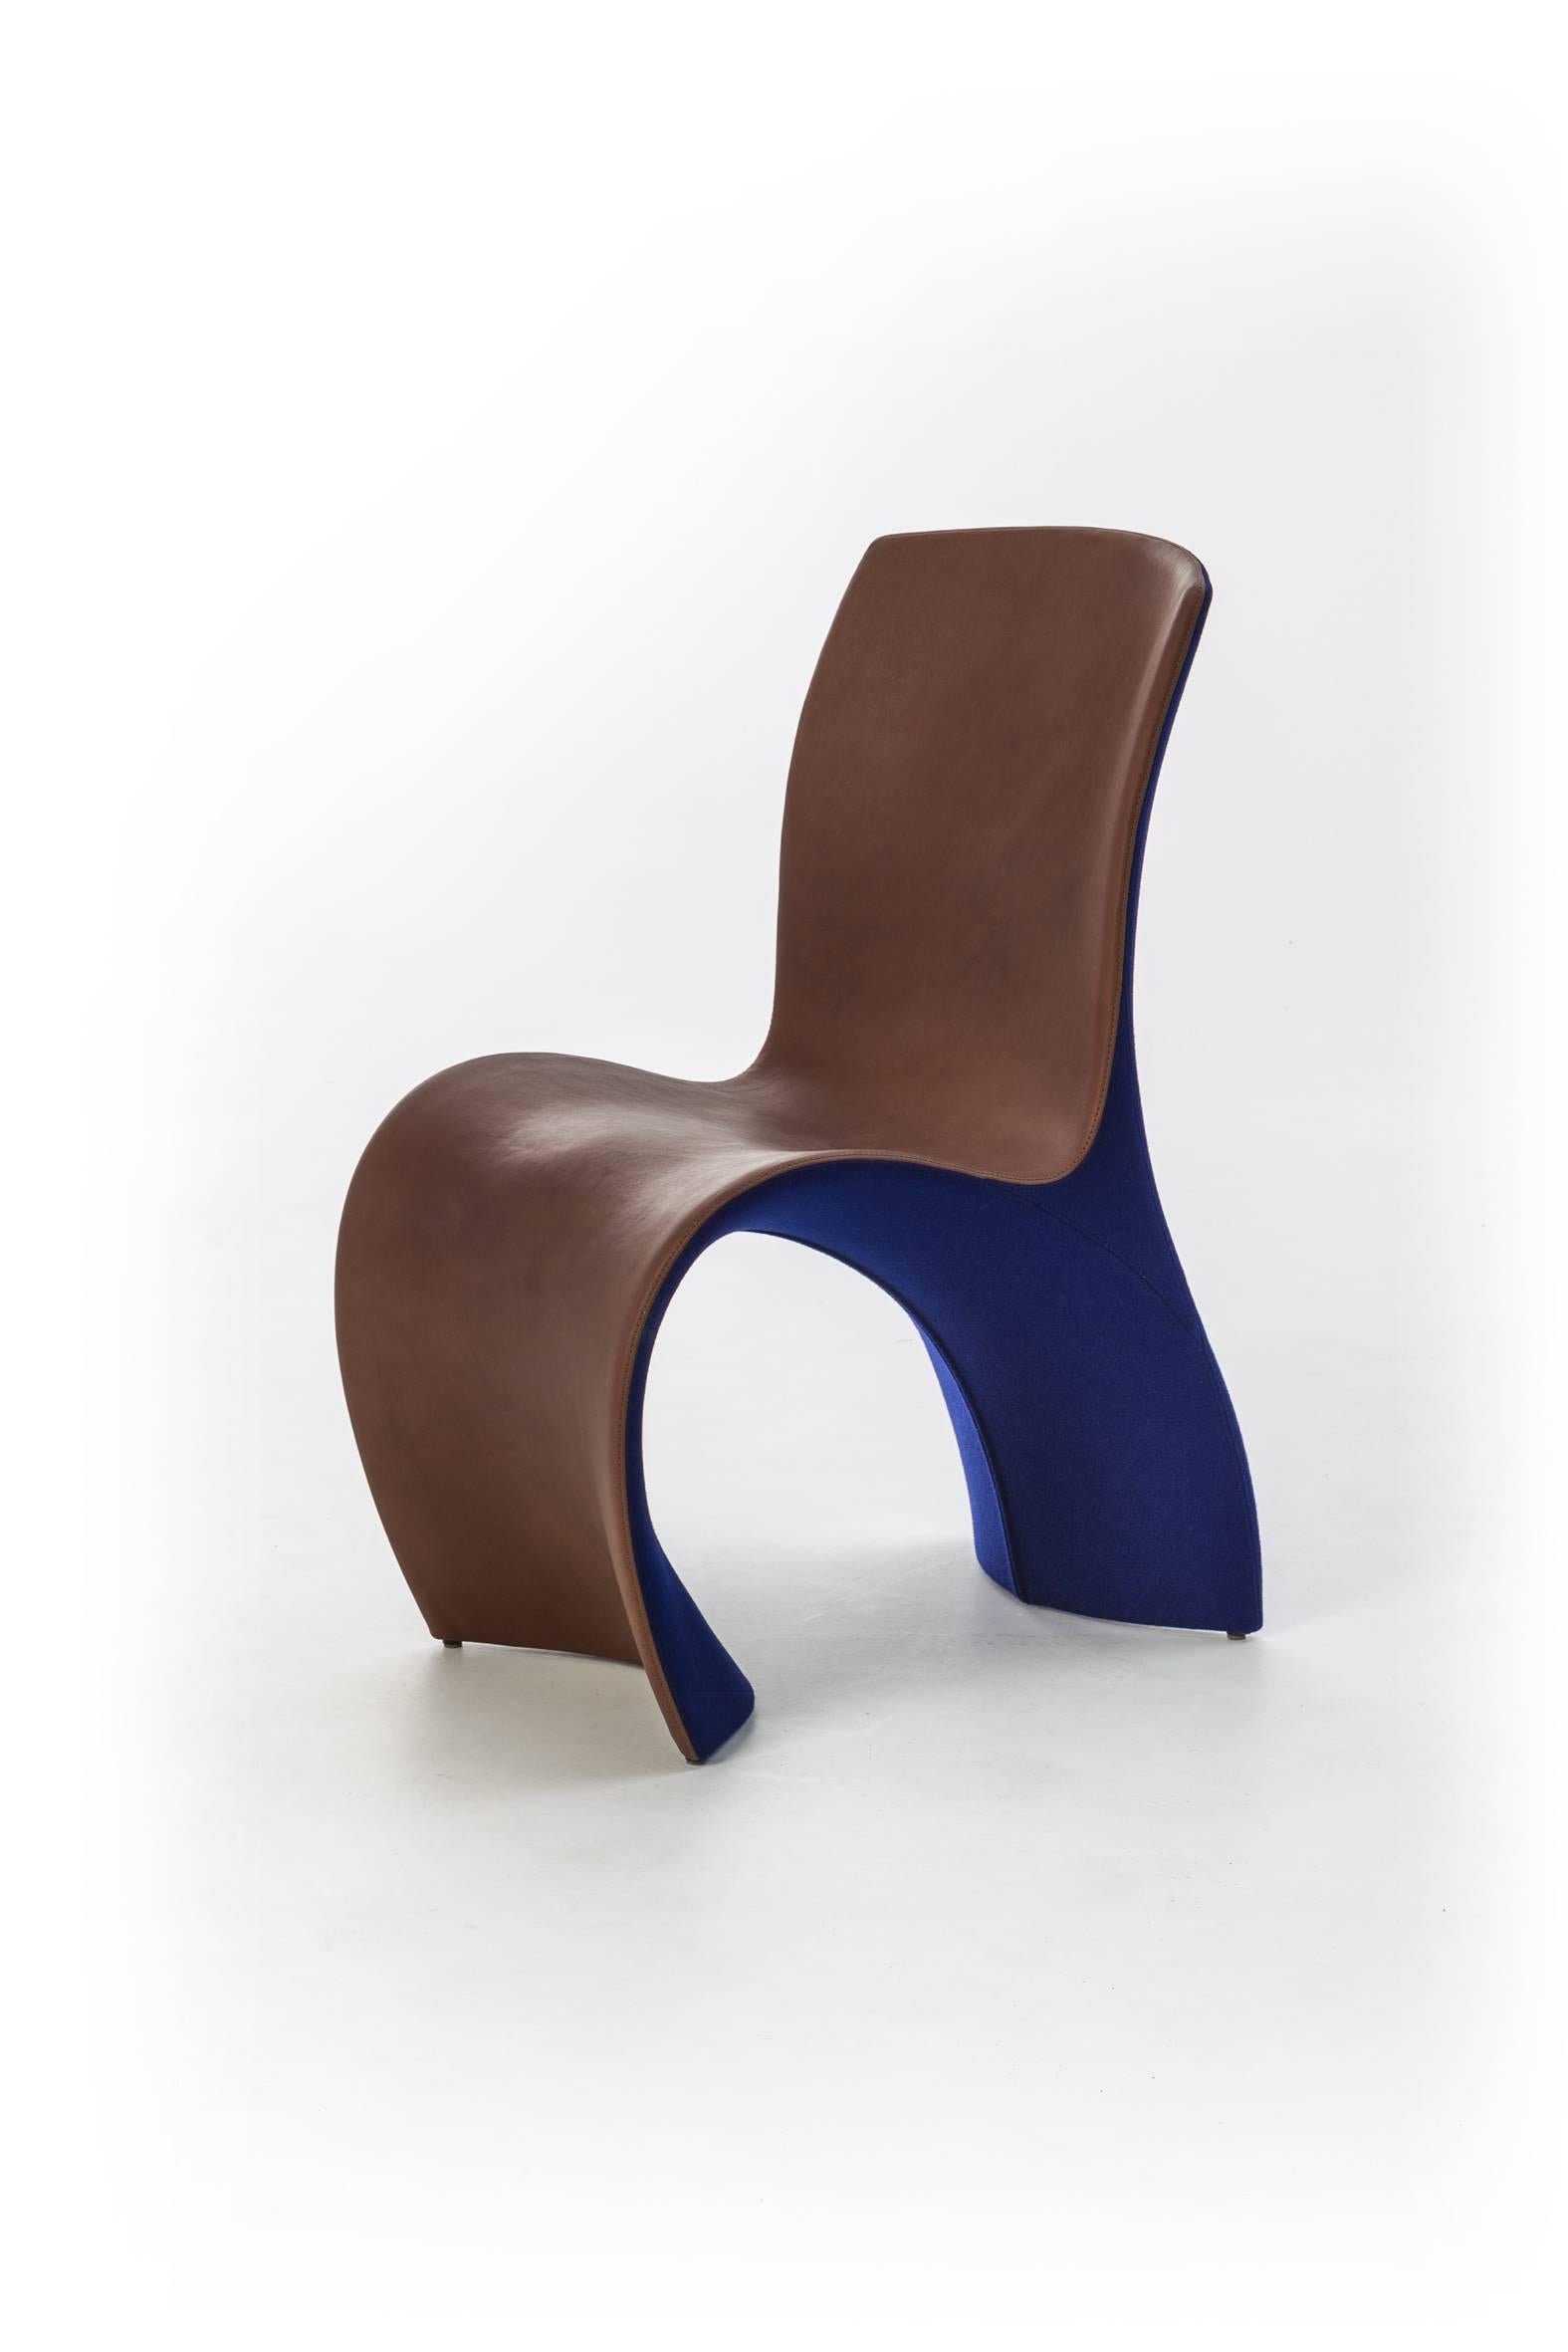 3 Skin Soft Chair by Ron Arad Upholstered in Fabric or Leather for Moroso In New Condition For Sale In Rhinebeck, NY